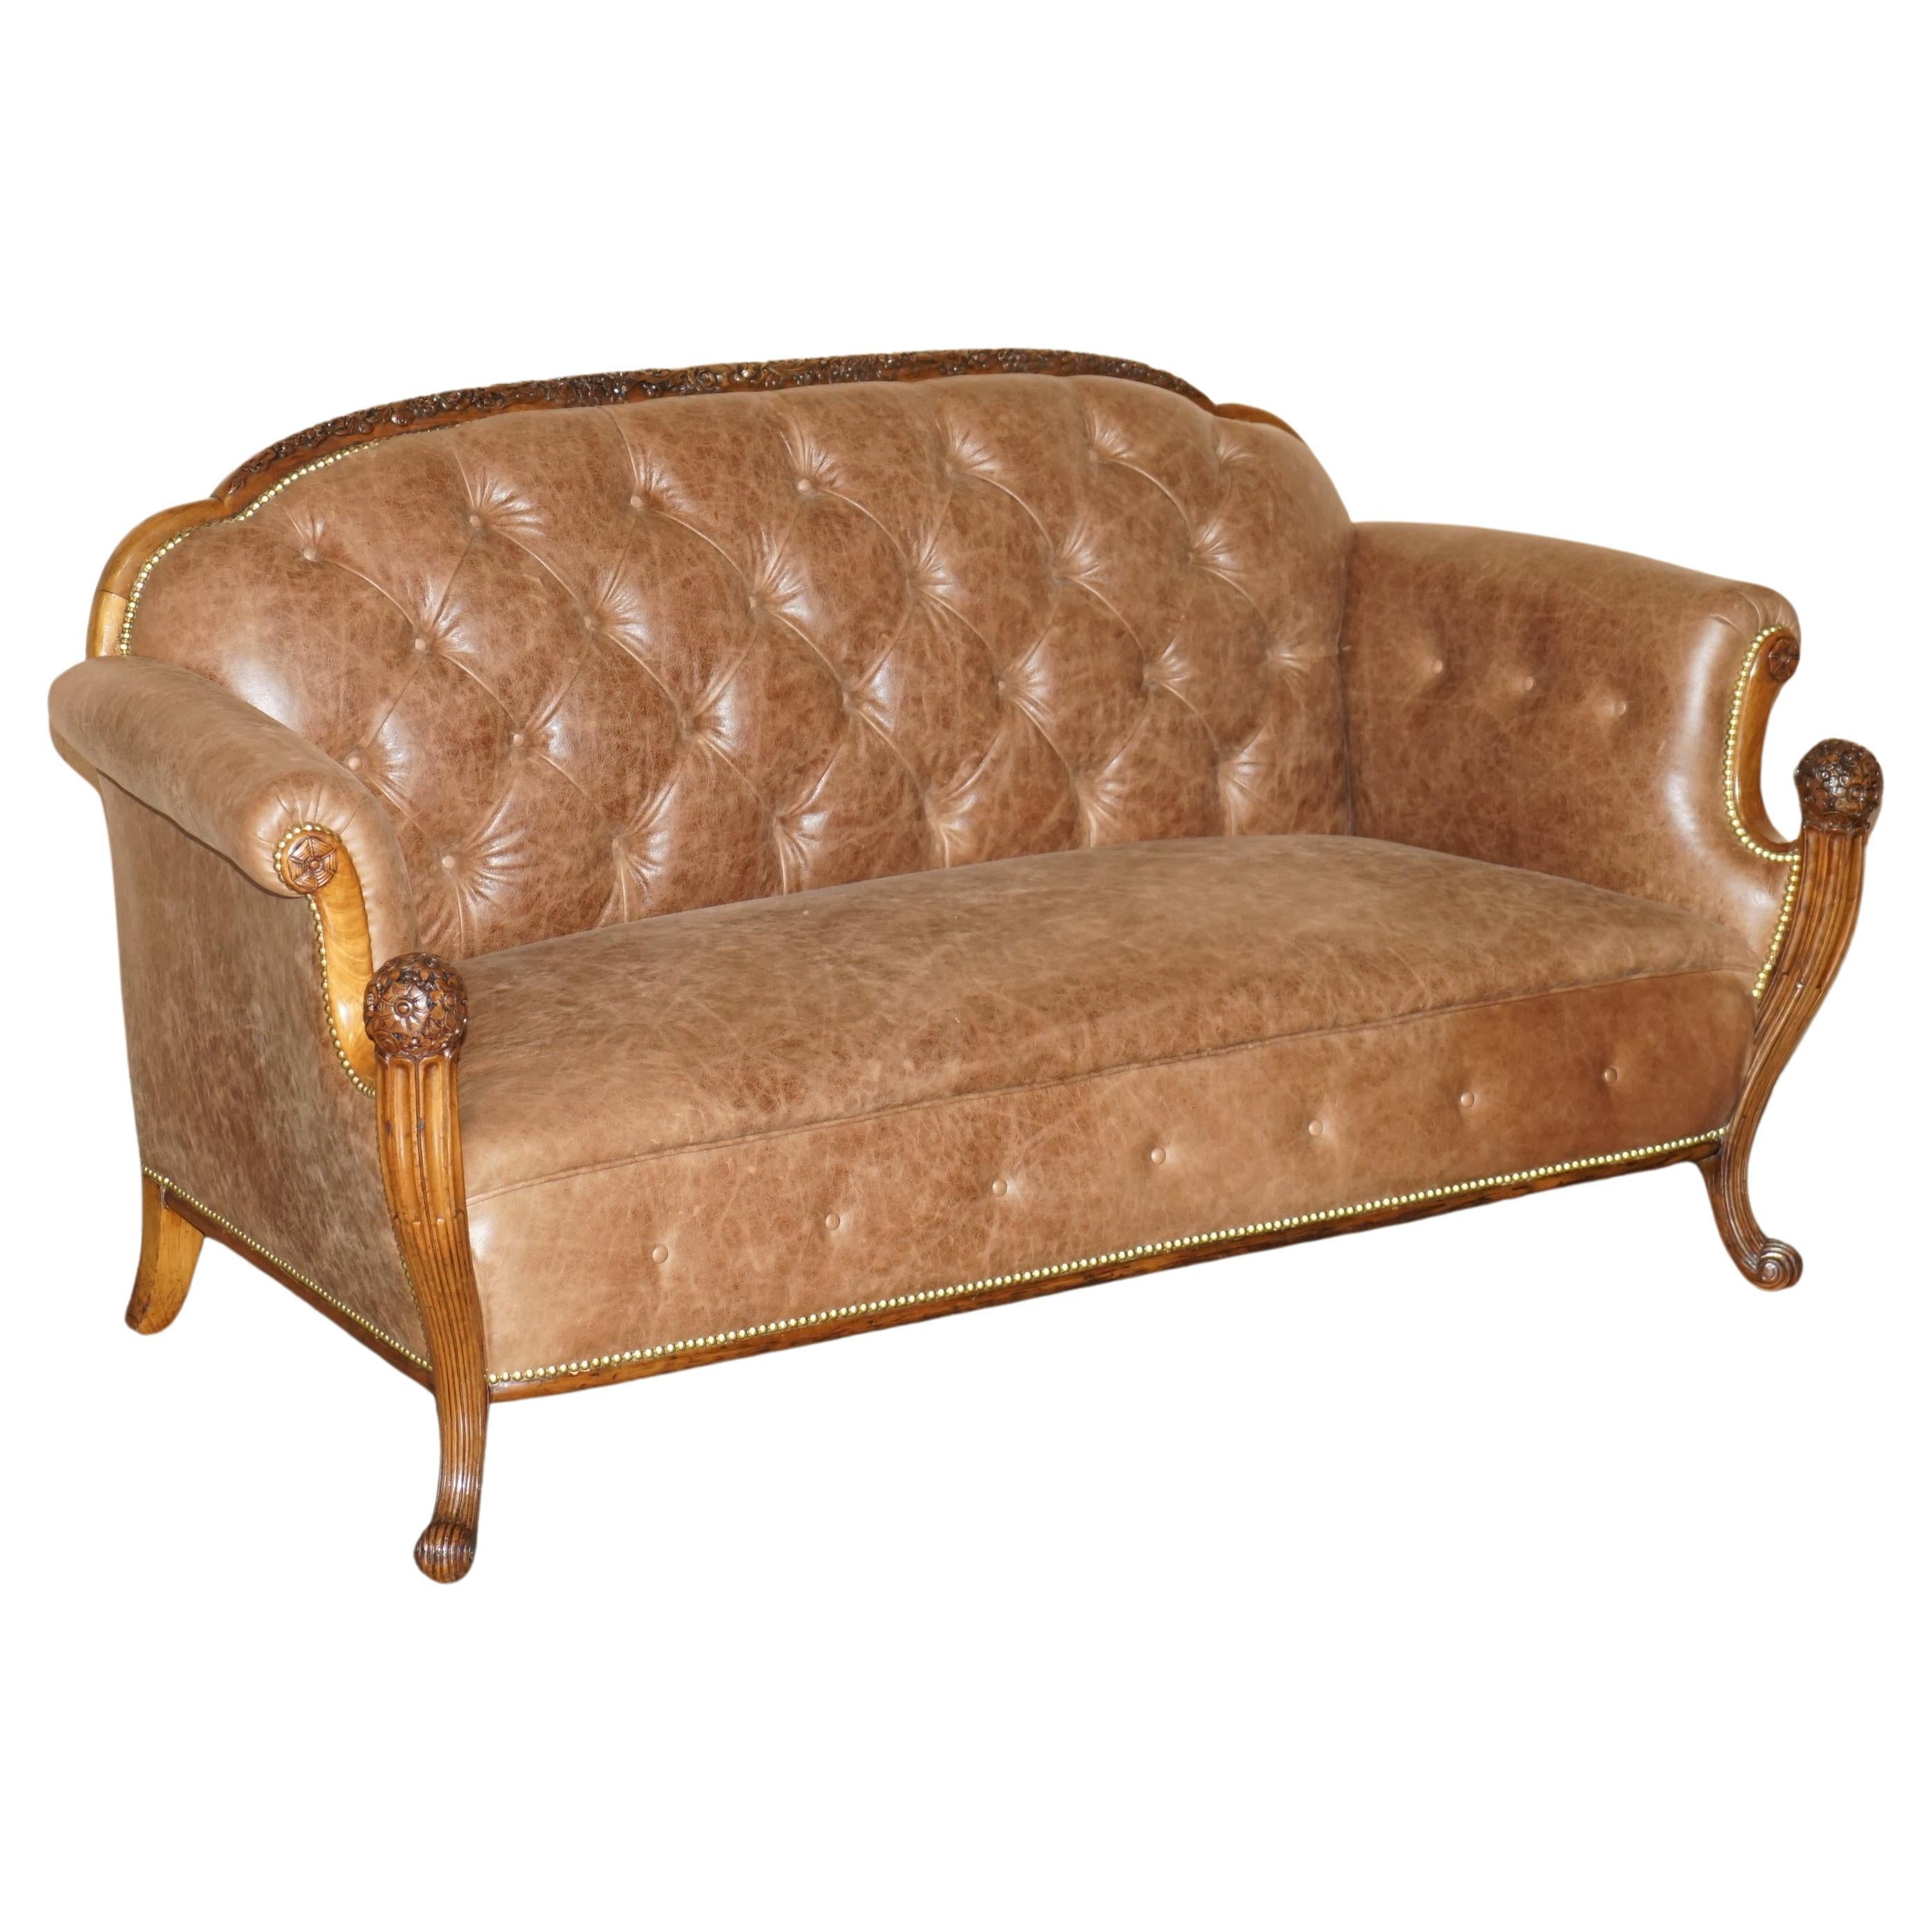 ANTIQUE FULLY RESTORED REGENCY 1810 CHESTERFiELD SOFA BROWN LEATHER CARVED FRAME For Sale